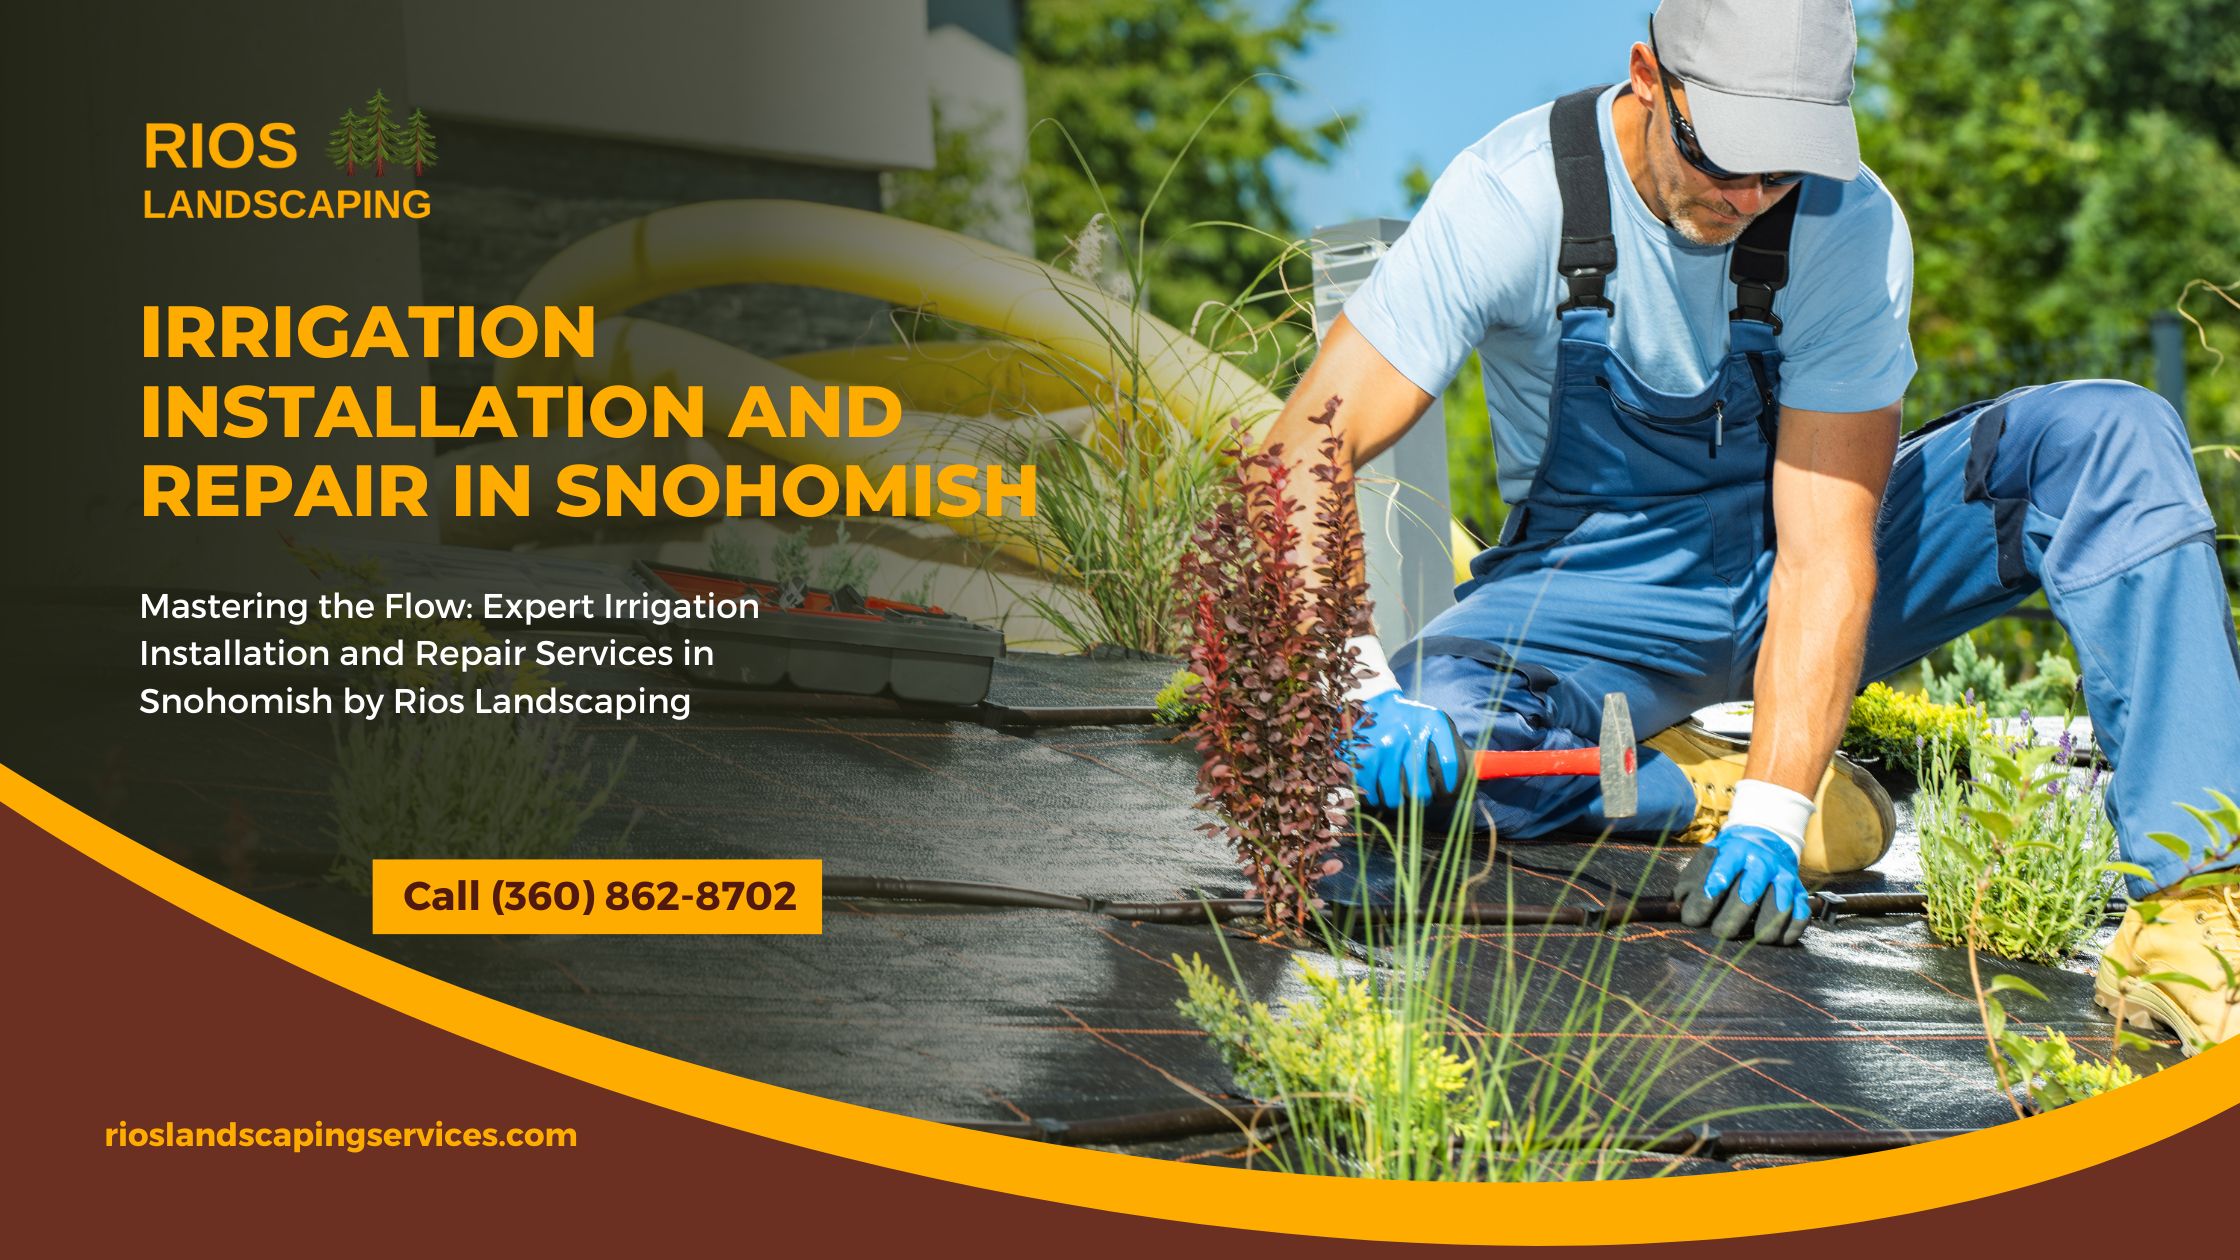 Irrigation Installation and Repair in Snohomish